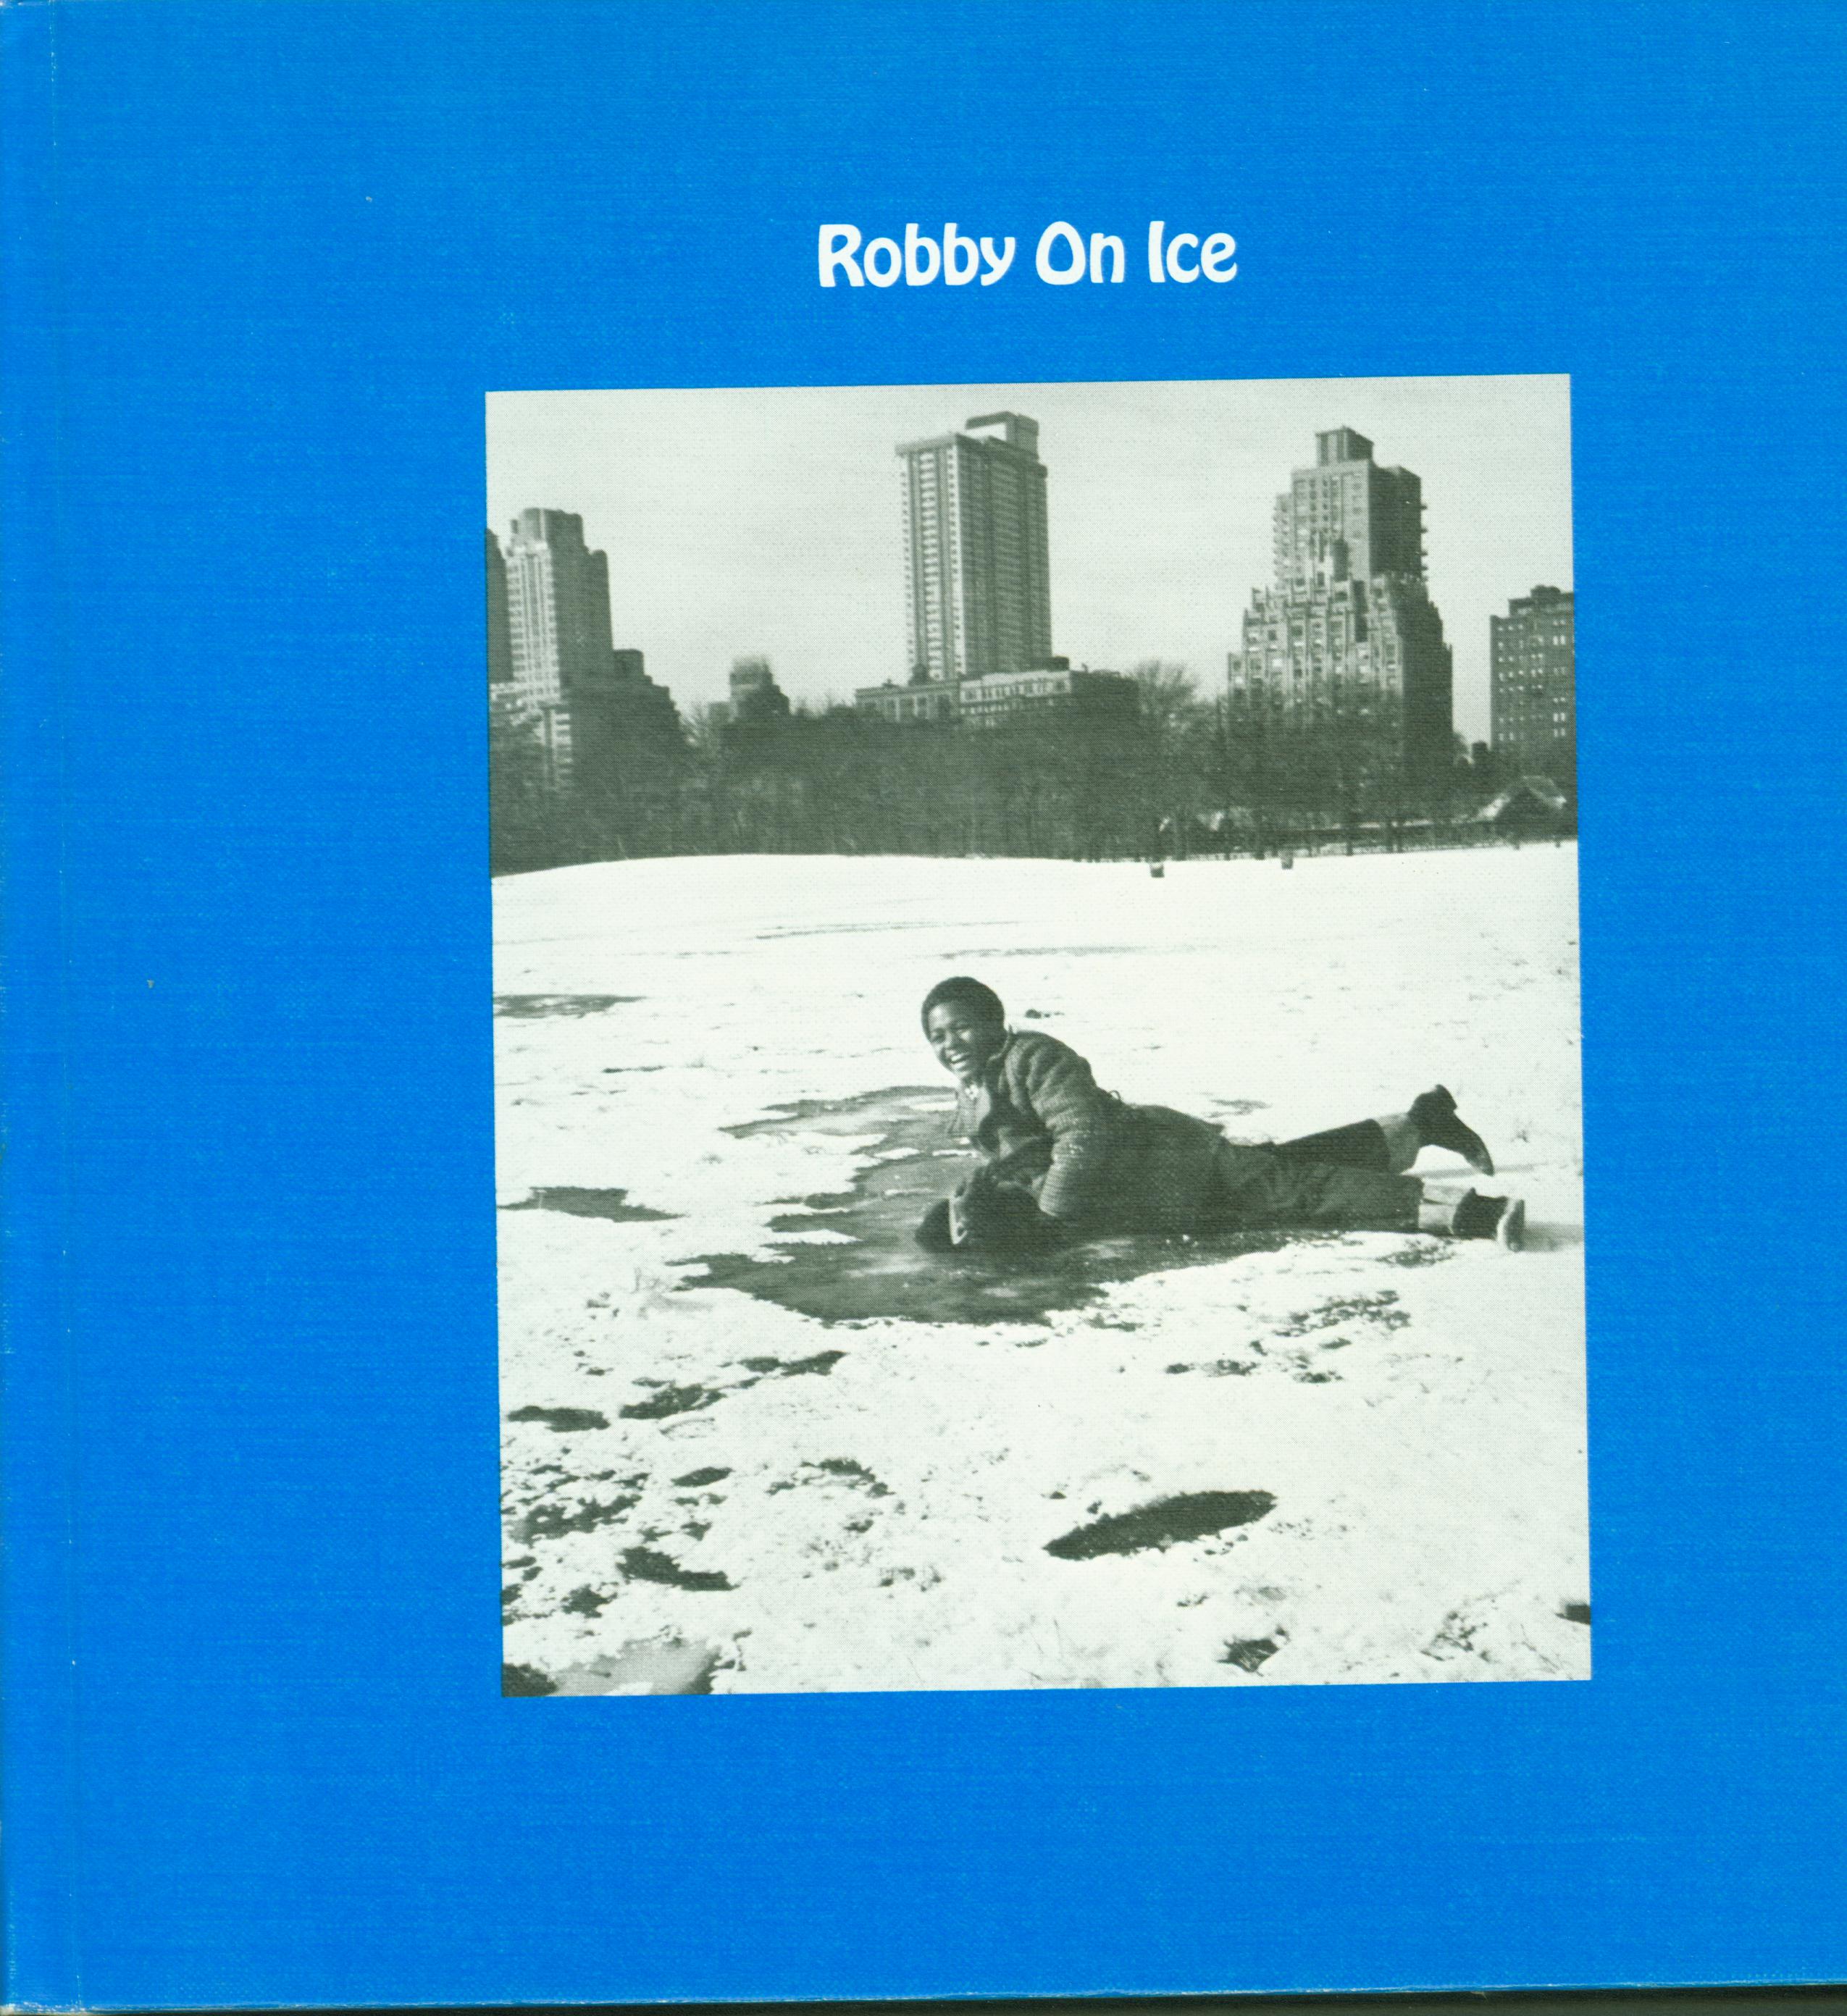 ROBBY ON ICE: adventures in the city.